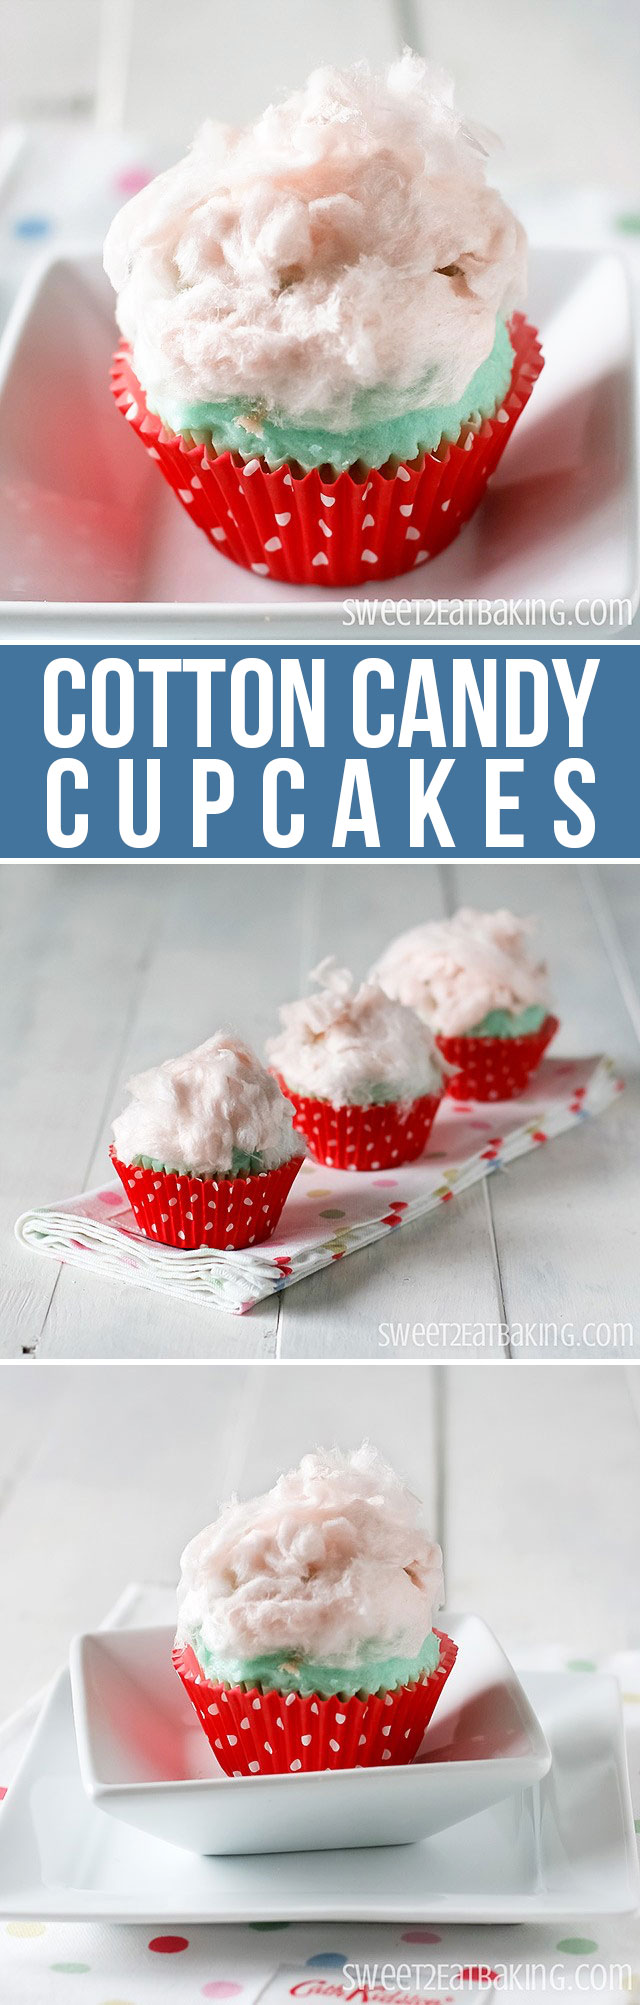 Cotton Candy Cupcakes Recipe by Sweet2EatBaking.com | Aka. Candy Floss or Fairy Floss. Whatever you call them, you can't get a sweeter cupcake than these. All the fun of the carnival | Dessert Recipes